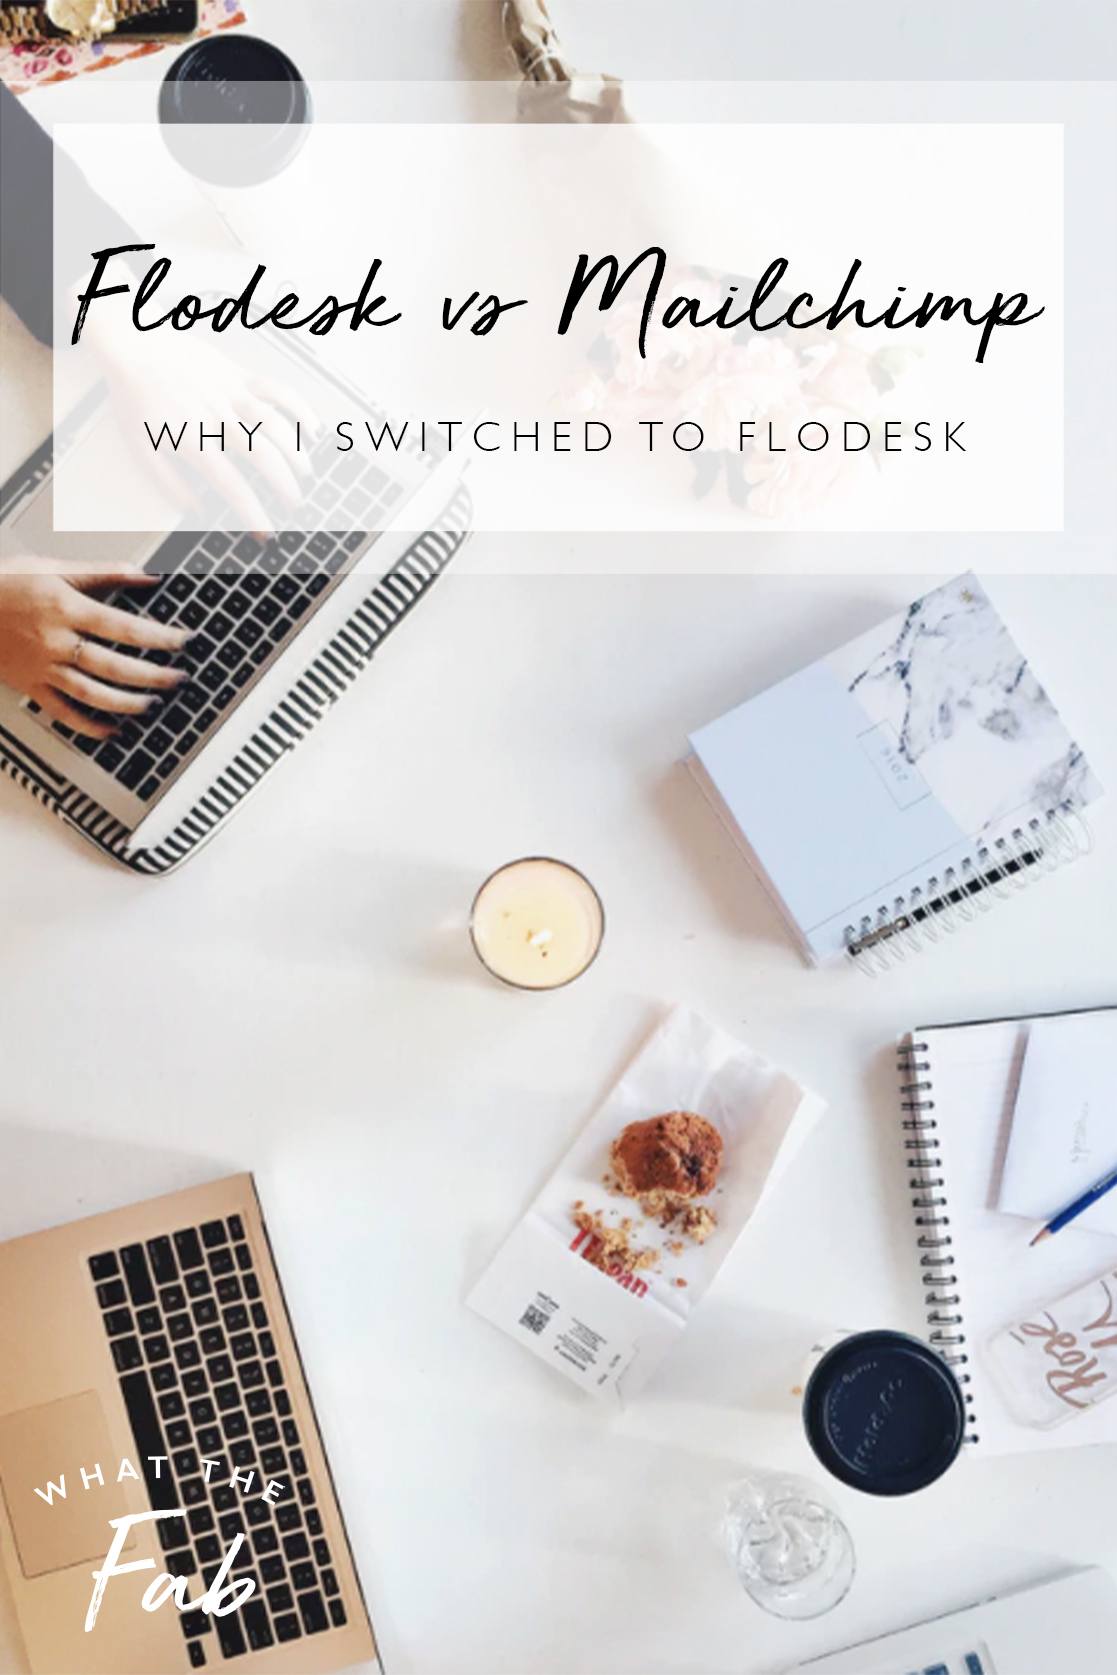 Flodesk vs Mailchimp, full Flodesk review by lifestyle blogger What The Fab